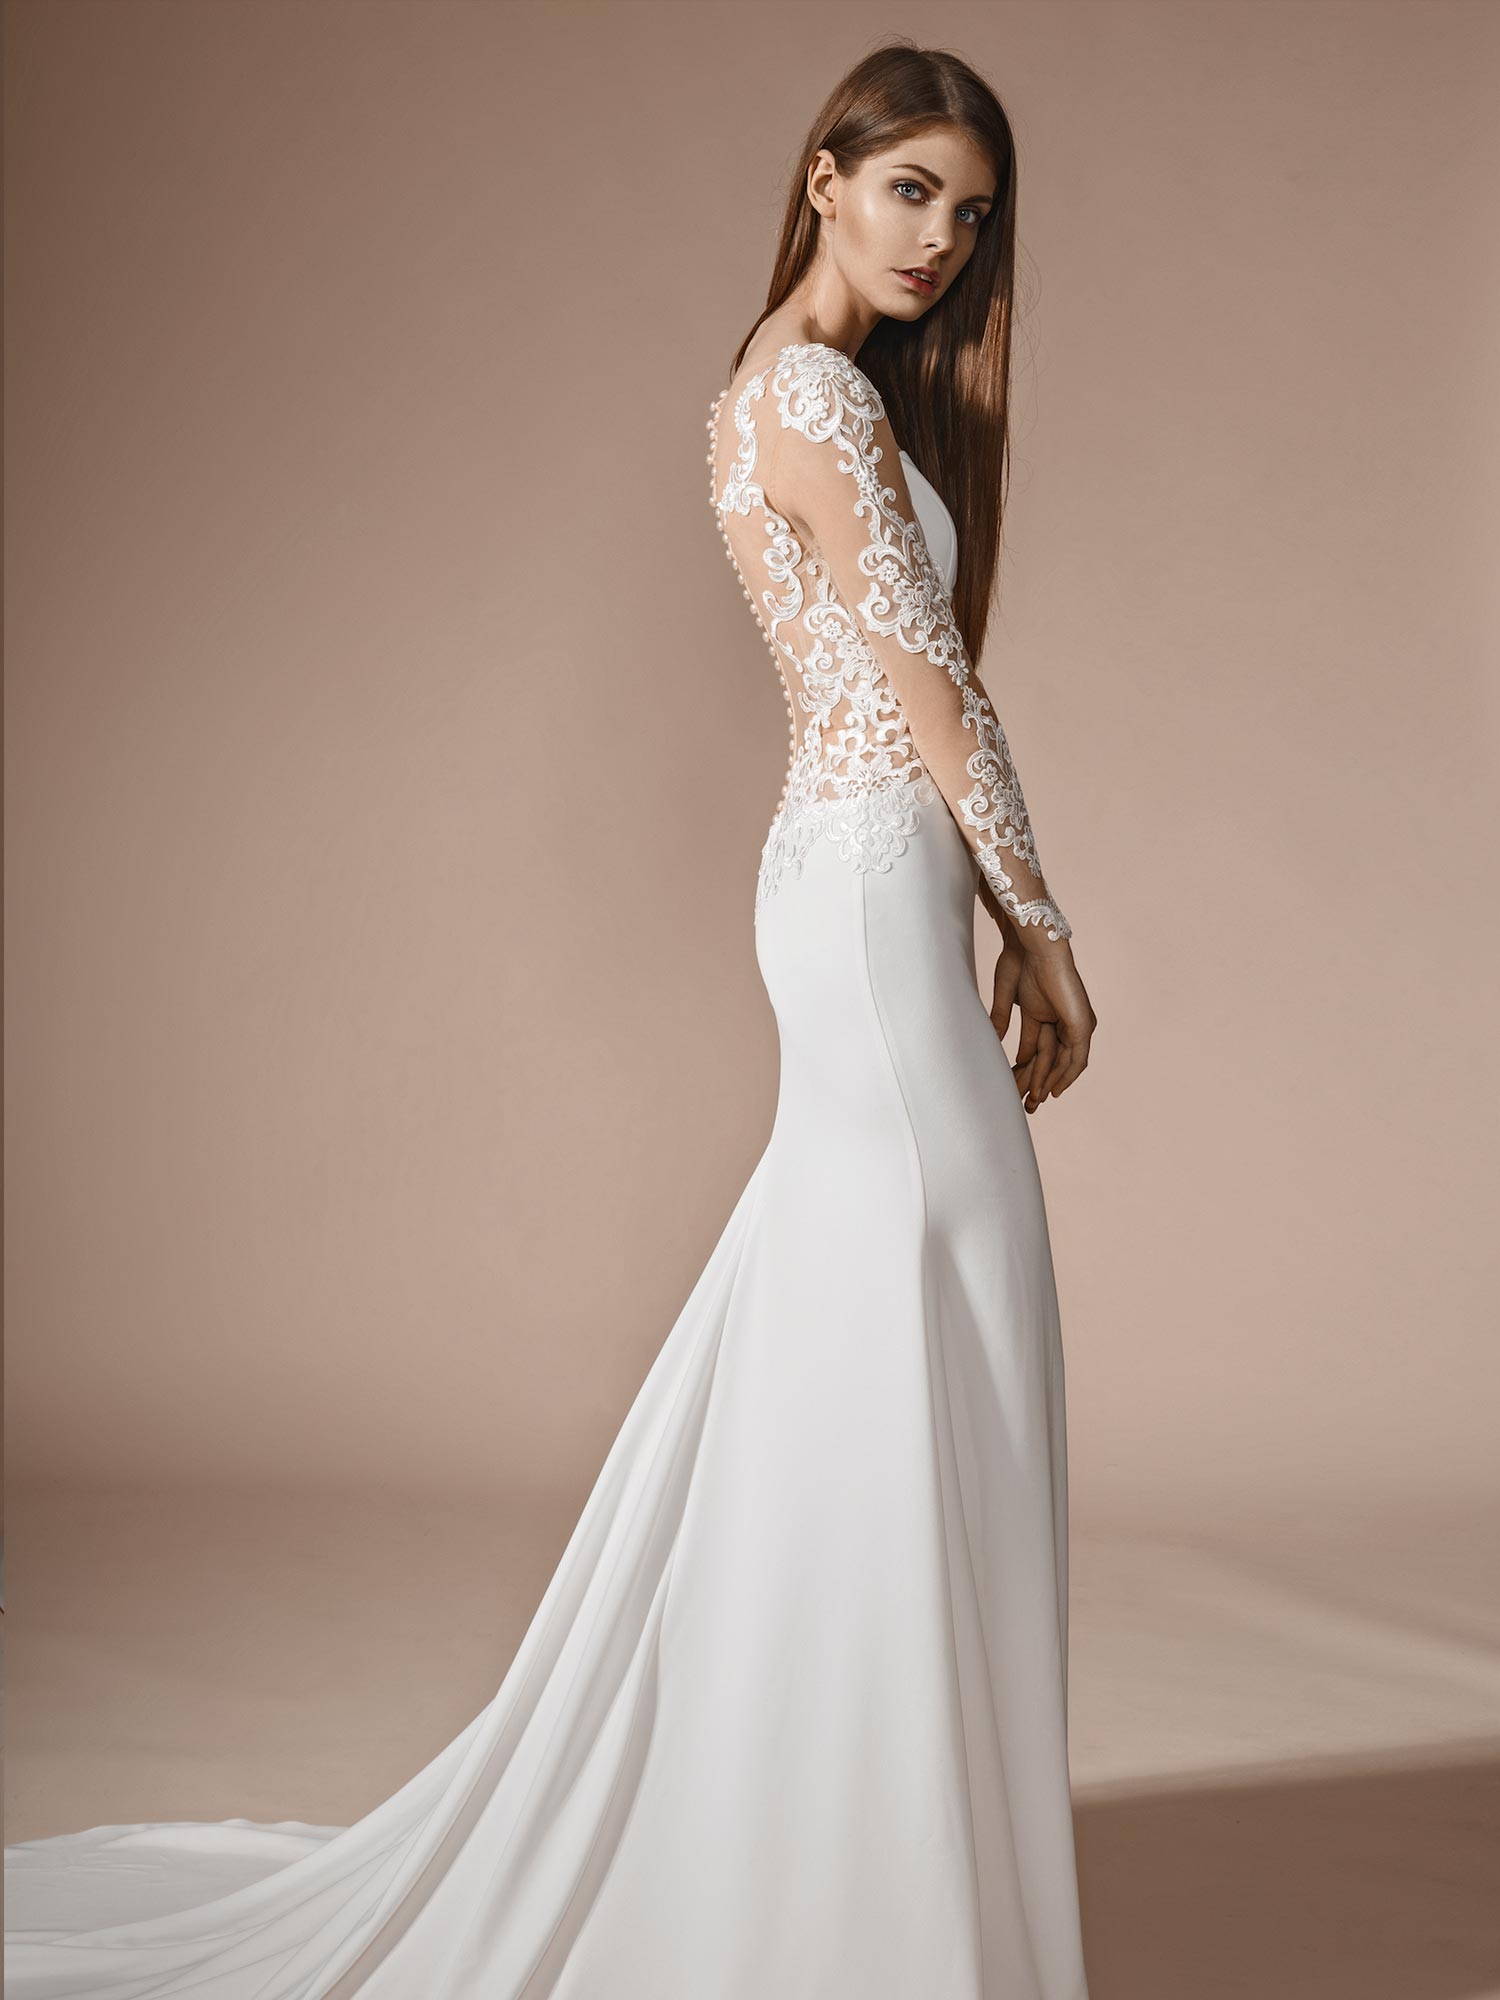 Papilio Fit And Flare Style Wedding Dress With Illusion Neckline And Long Sleeves